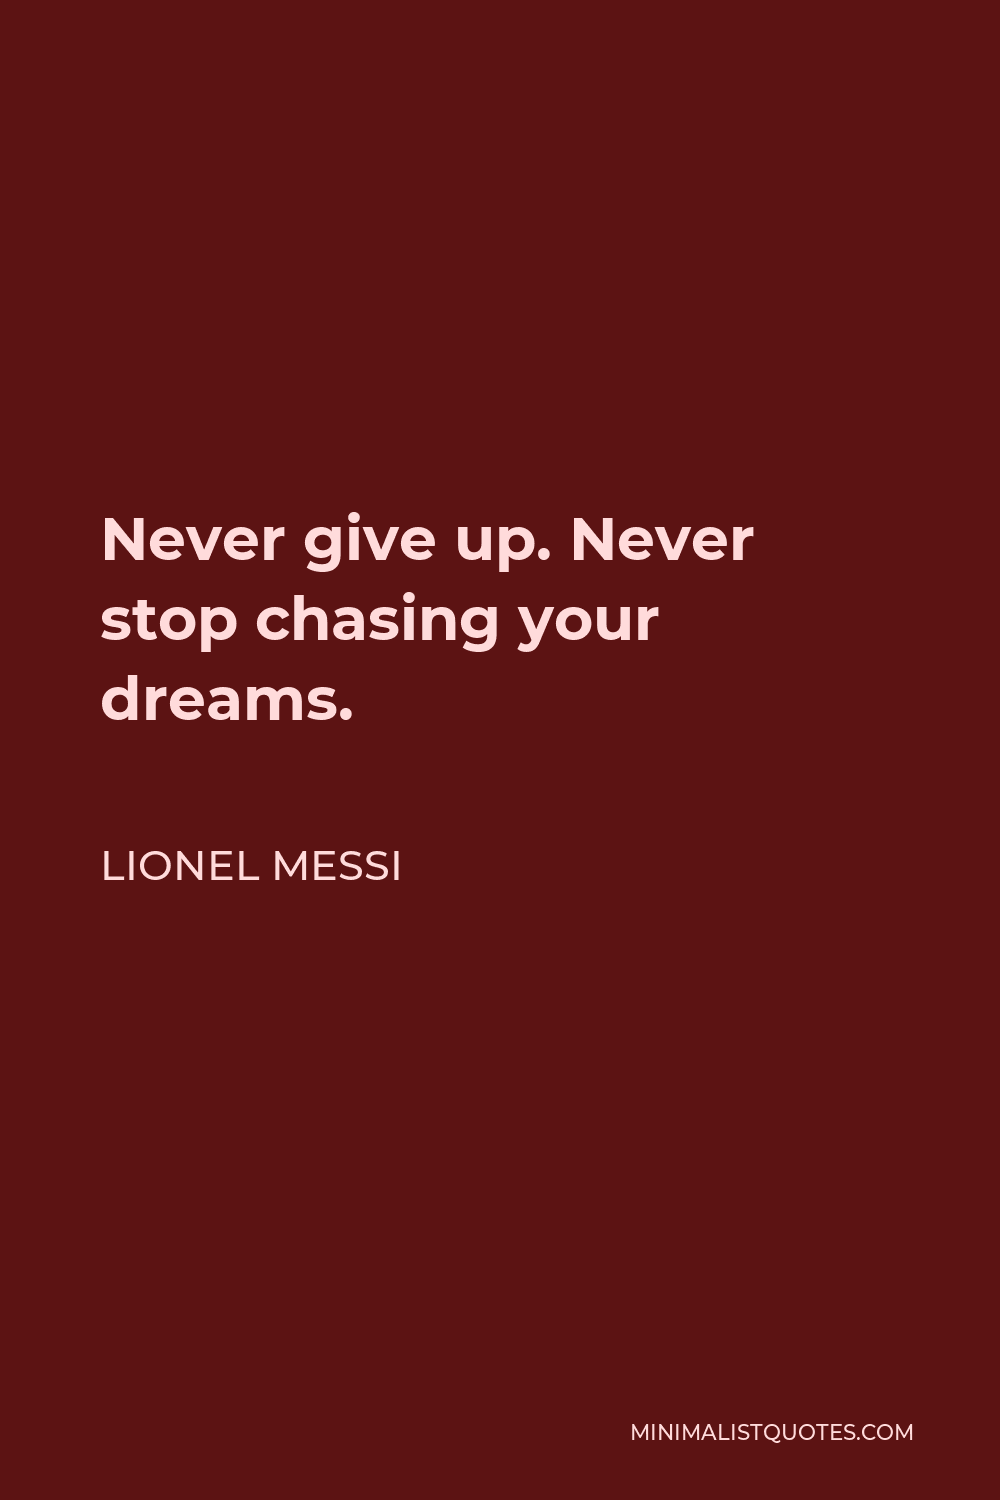 Lionel Messi Quote - Never give up. Never stop chasing your dreams.